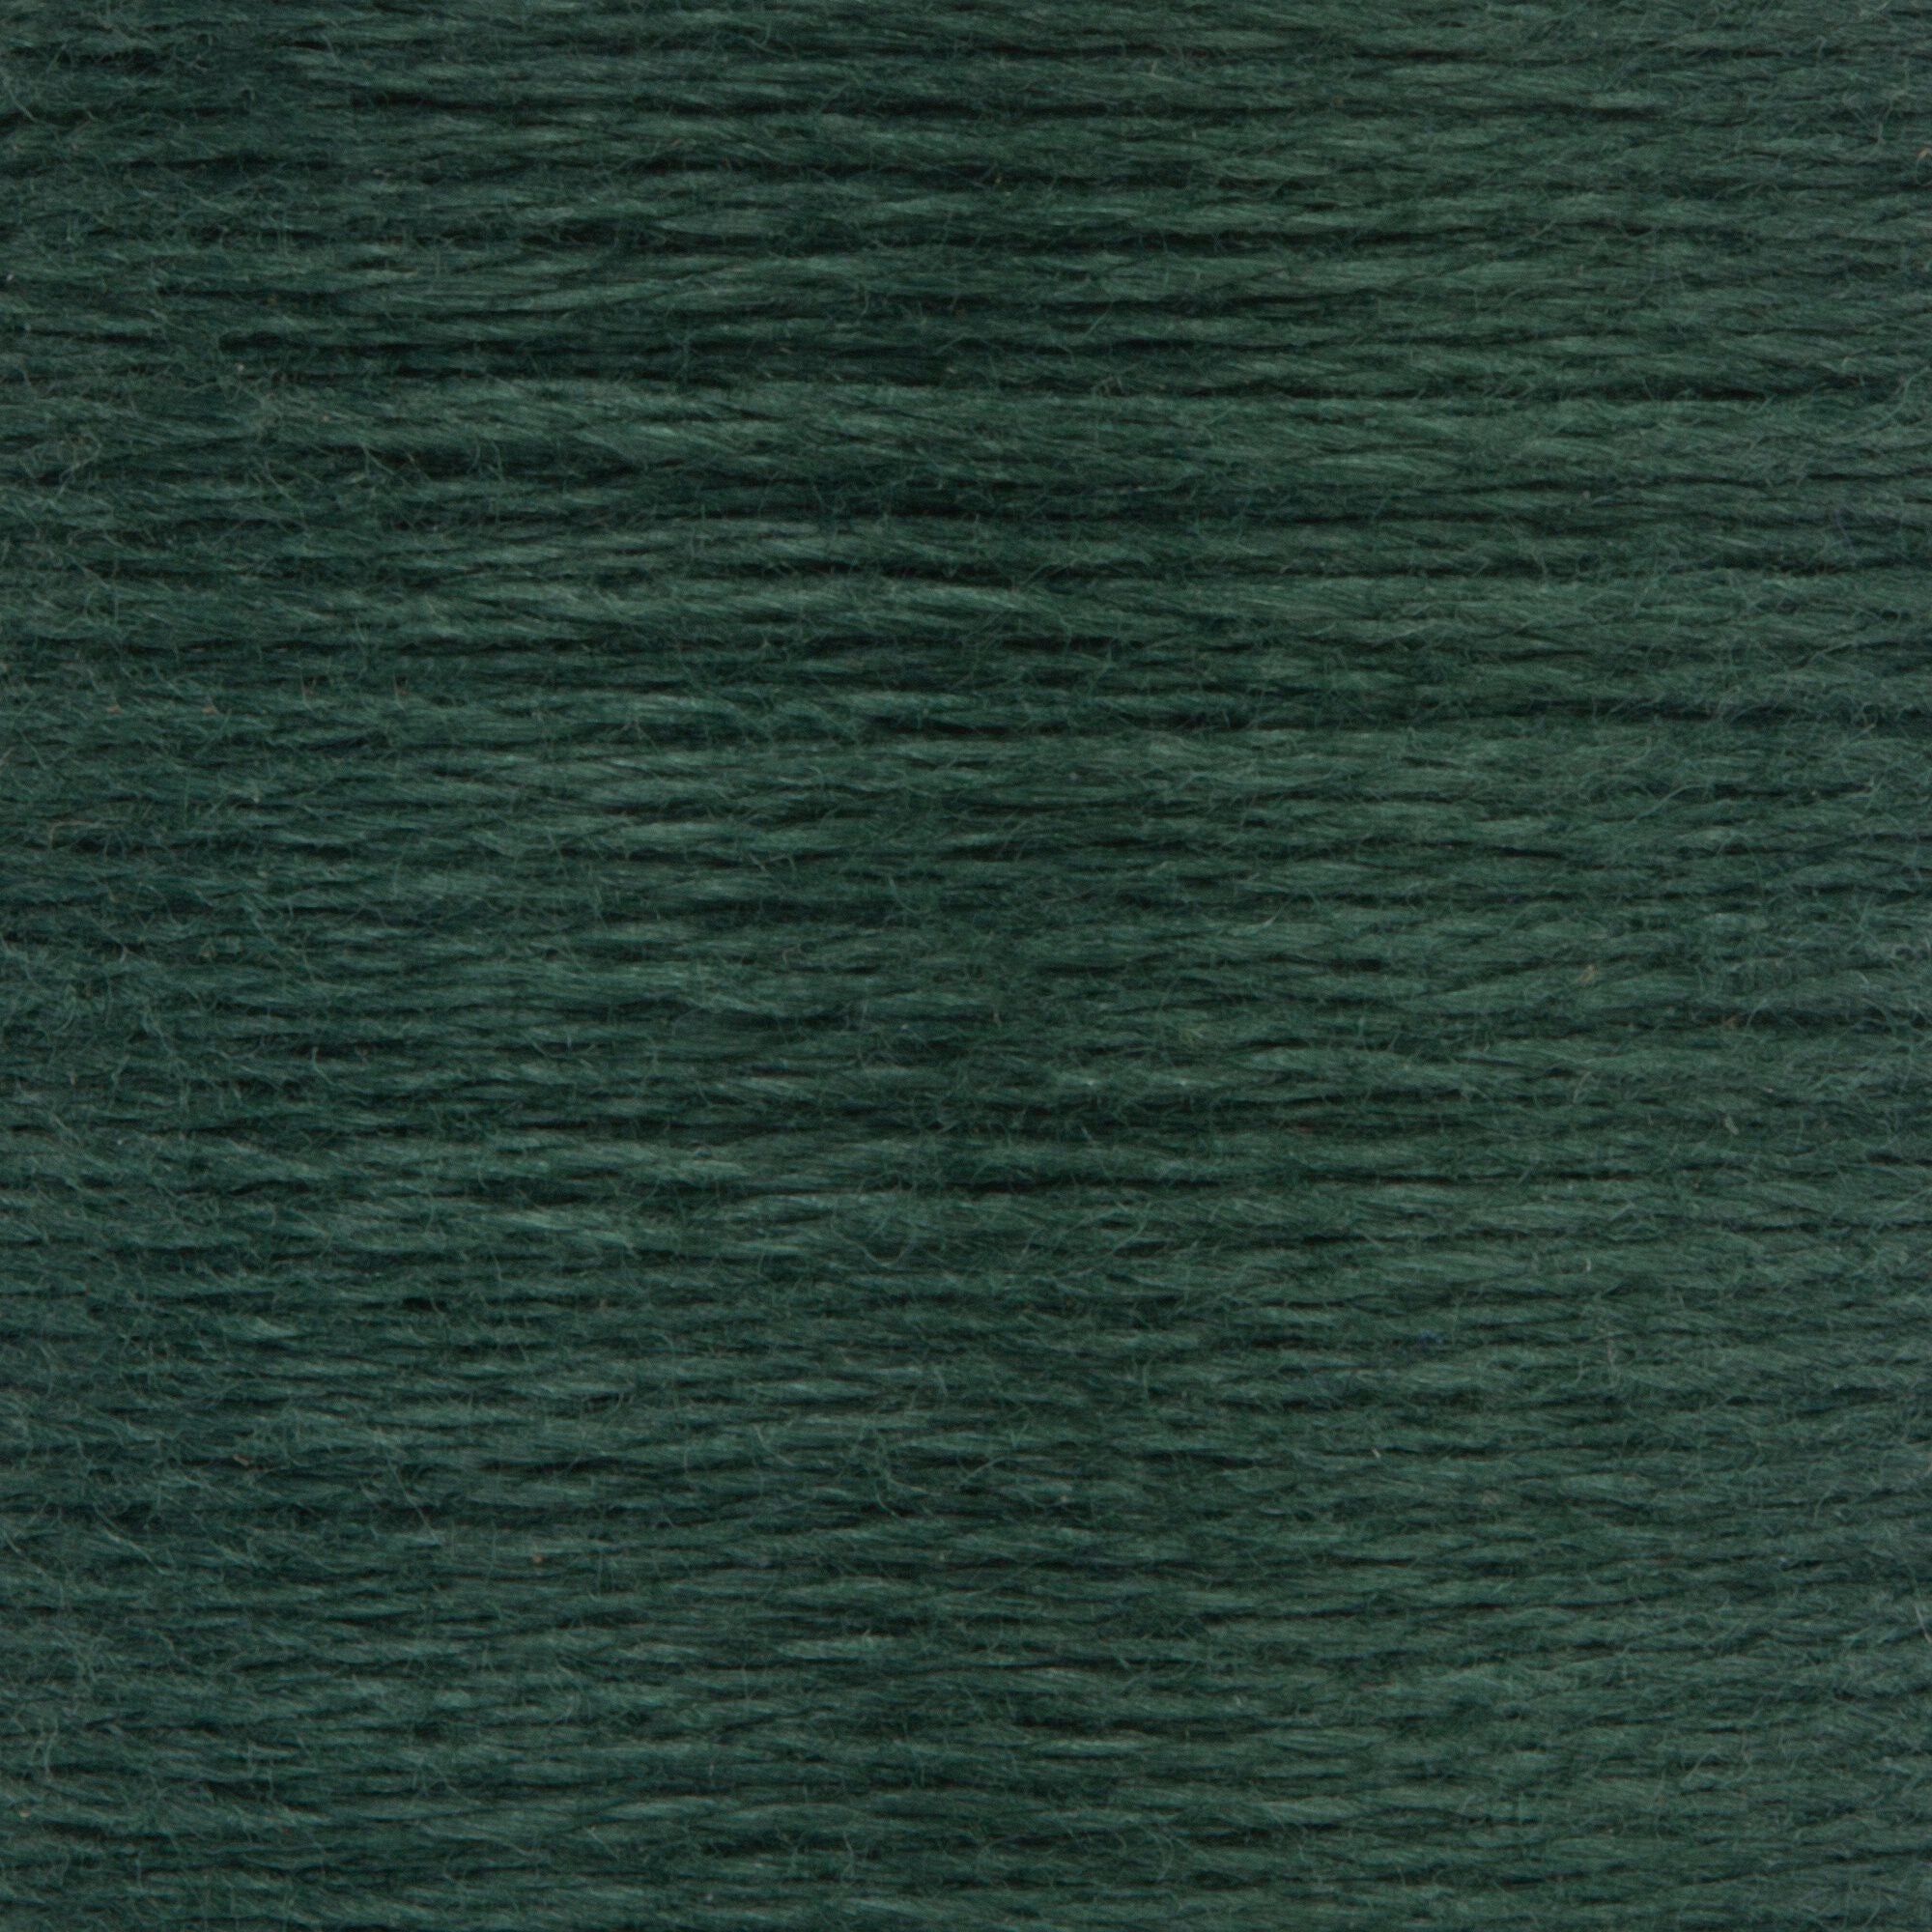 Anchor Embroidery Floss in Turf Green